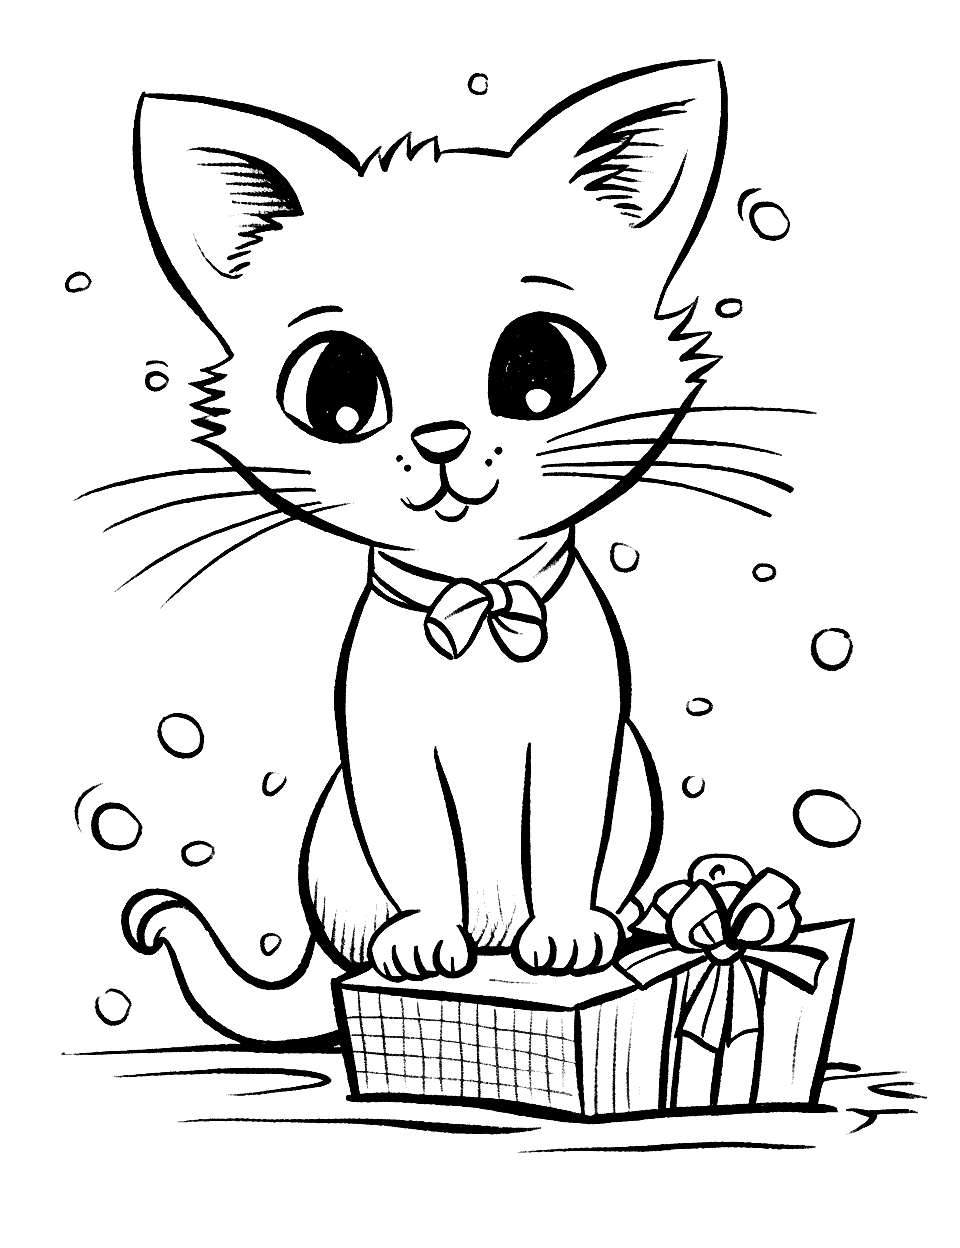 Cat’s Birthday Surprise Cat Coloring Page - A surprised cat opening a gift box on its birthday.